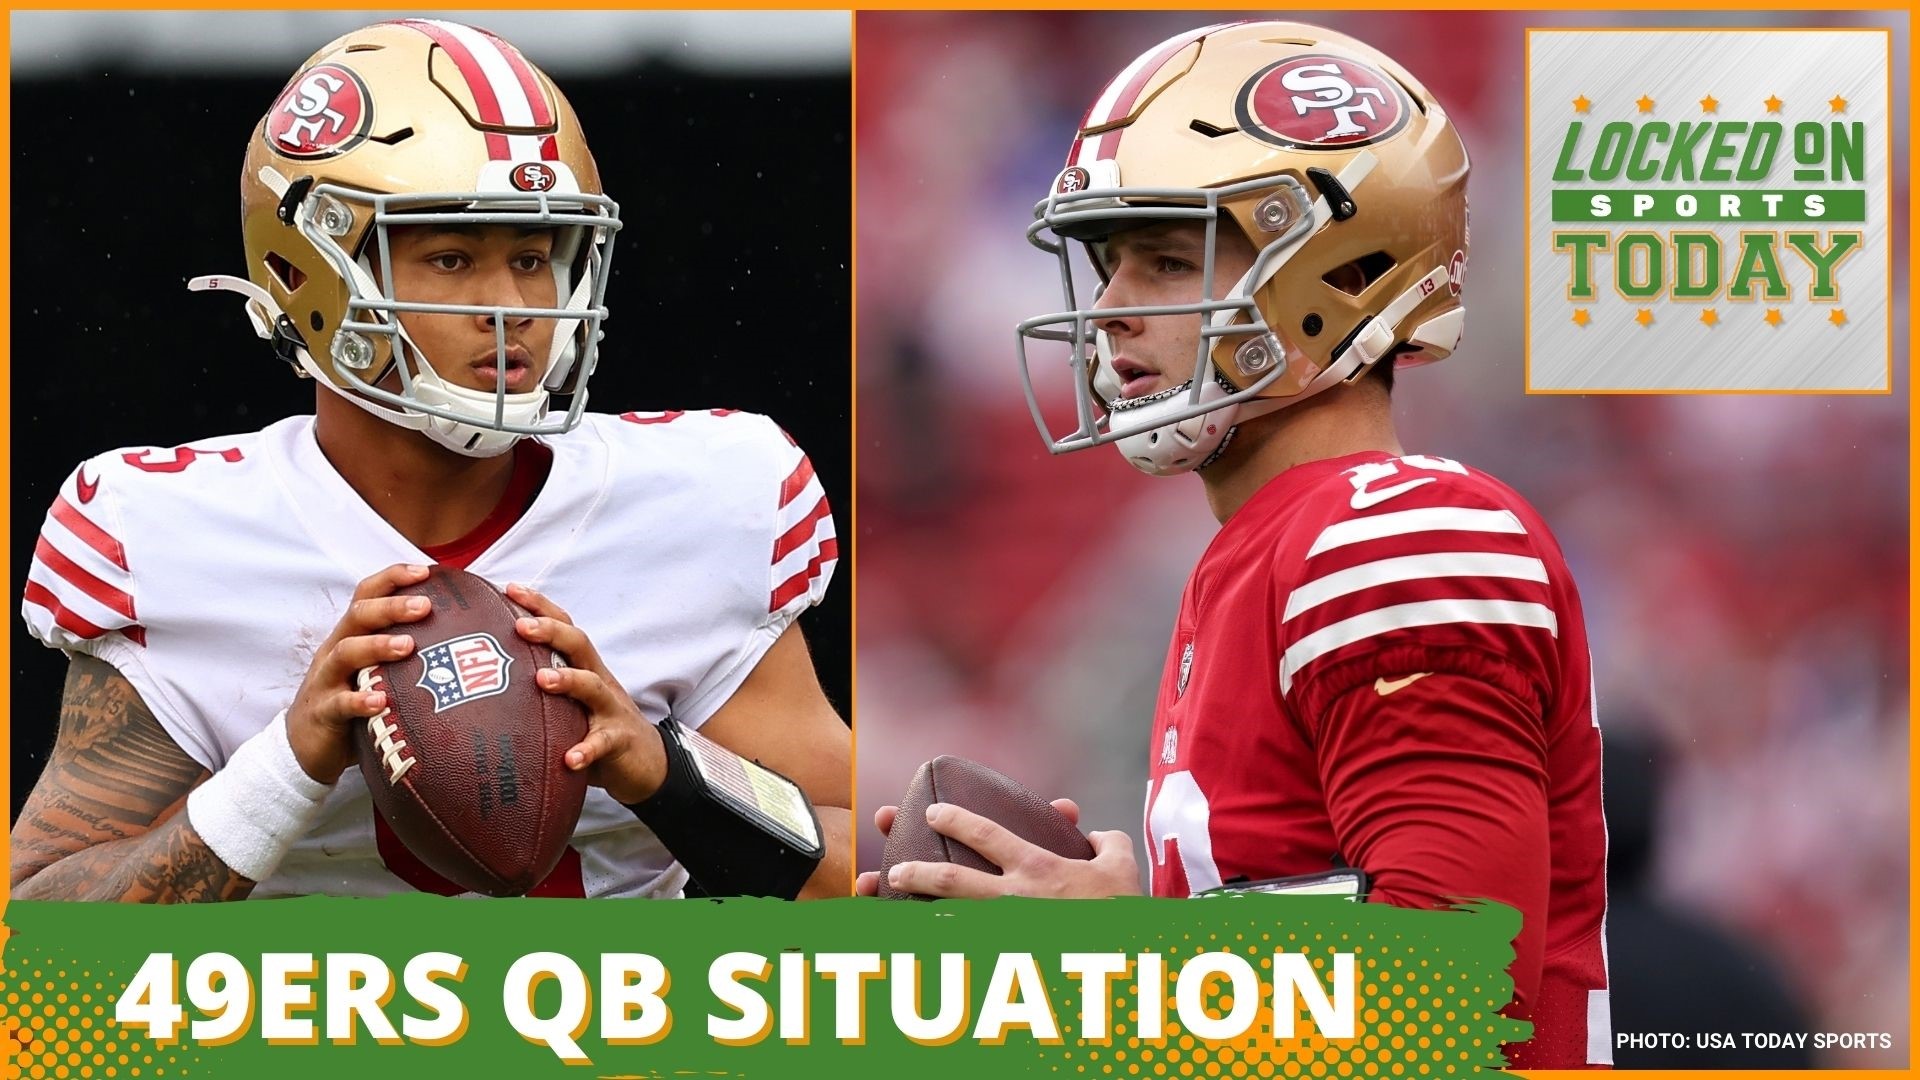 Discussing and debating the day's top sports stories from the 49ers quarterback situation to the Chargers setting up an exciting offensive year with a new hire.